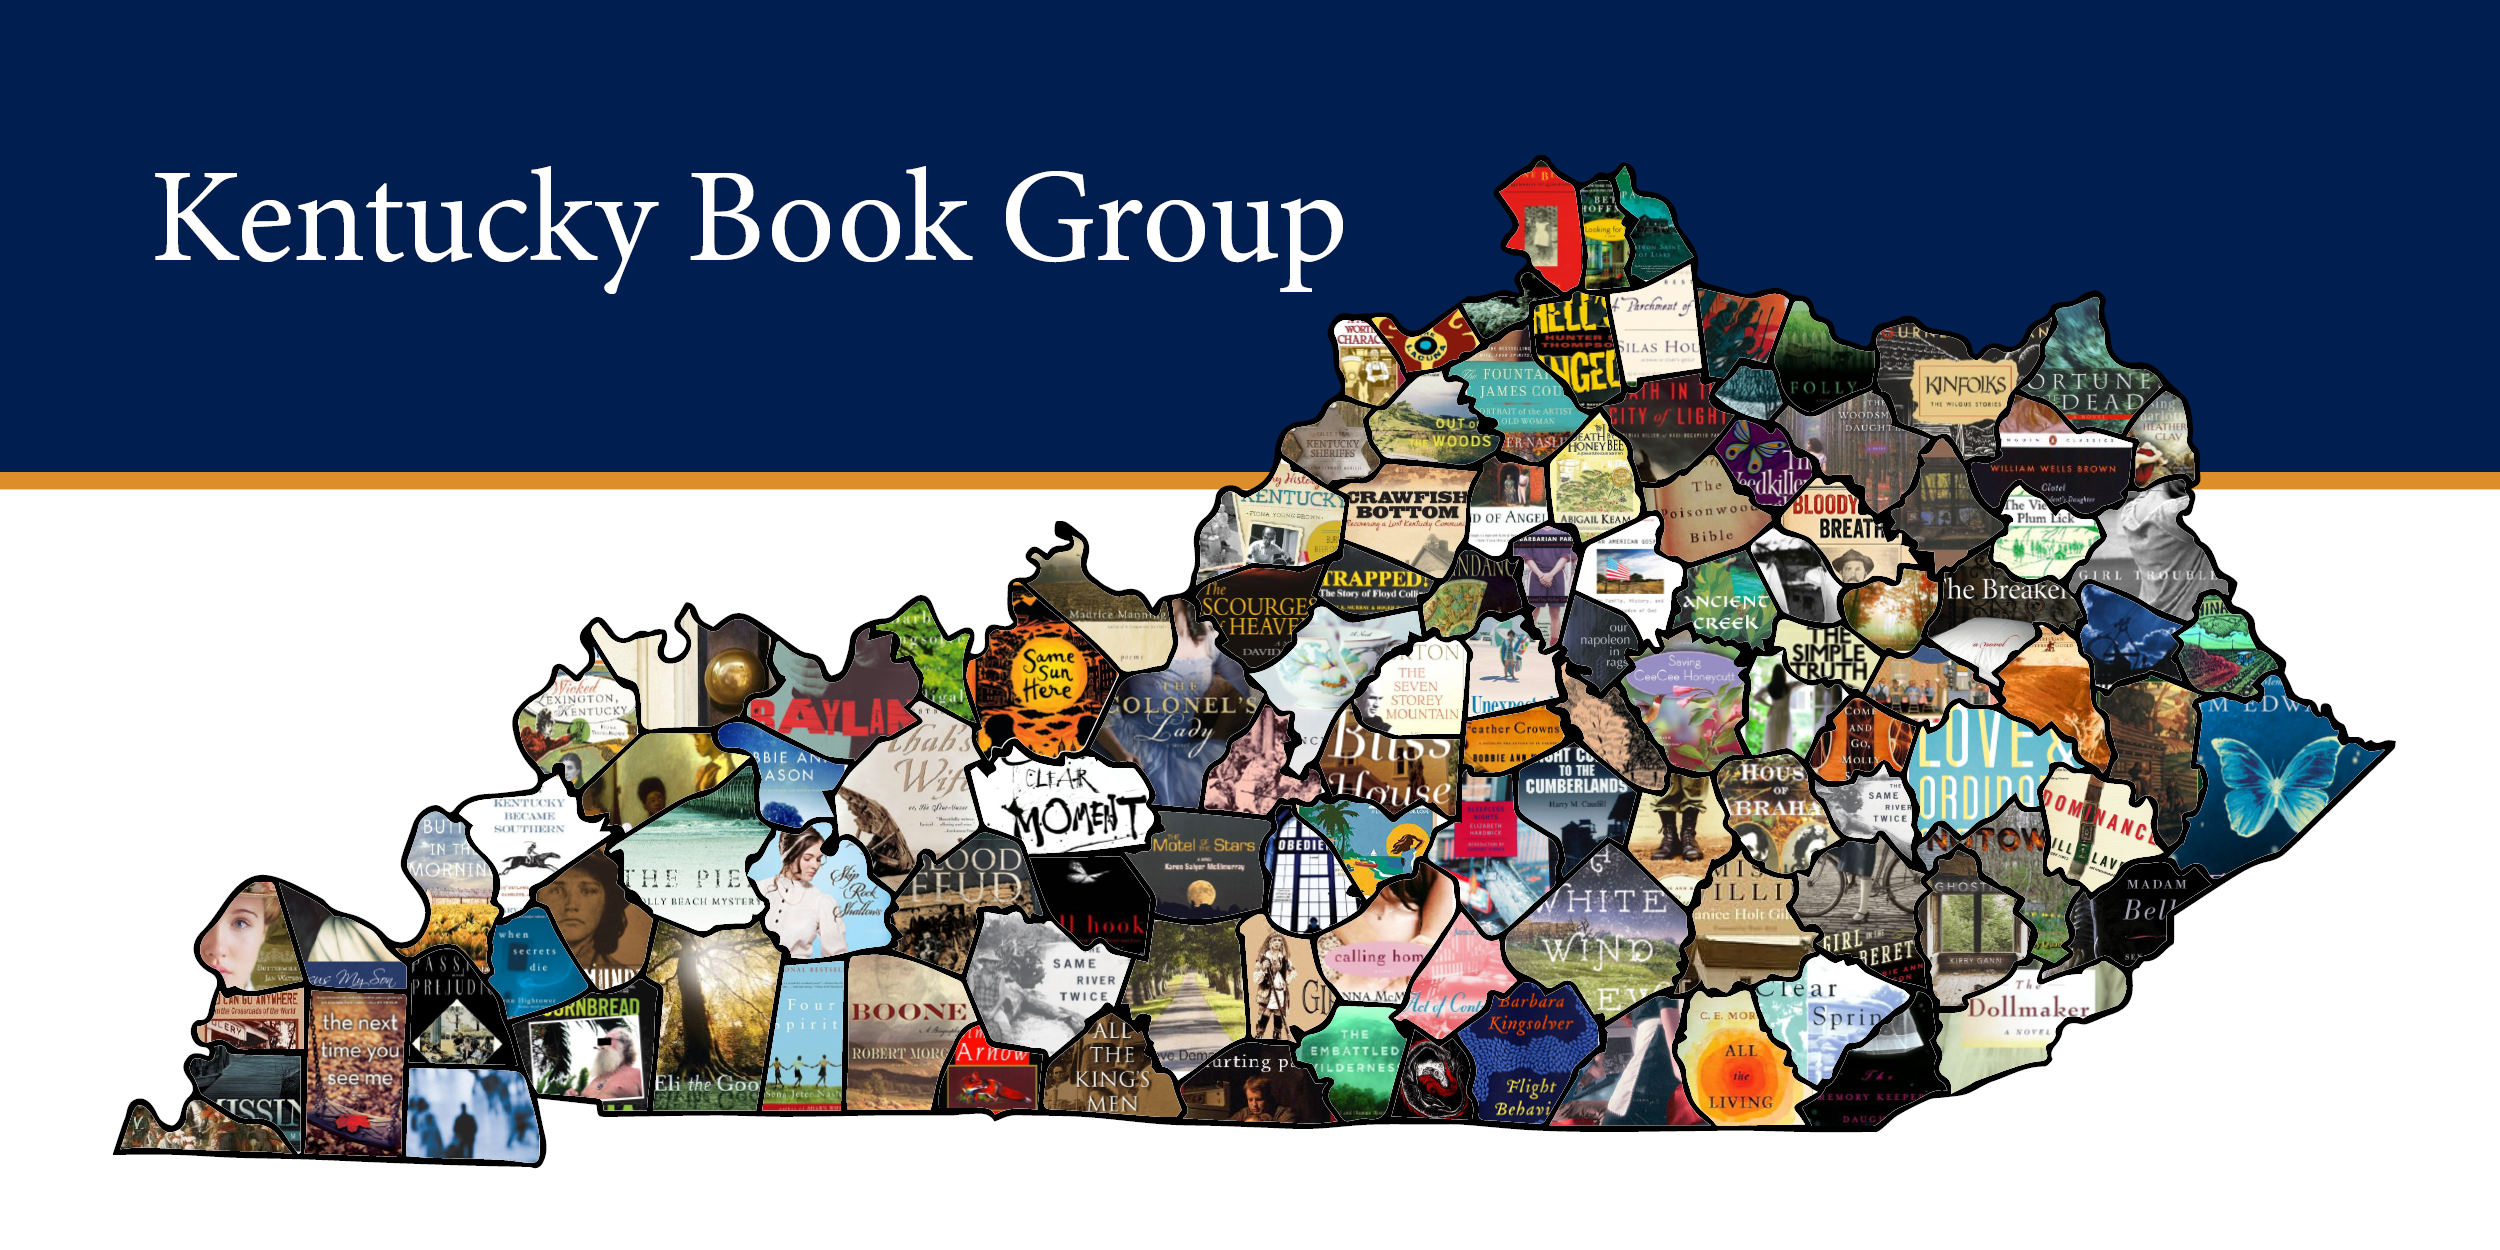 Map showing parts of book covers superimposed over map of Kentucky counties reading "Kentucky Book Group"